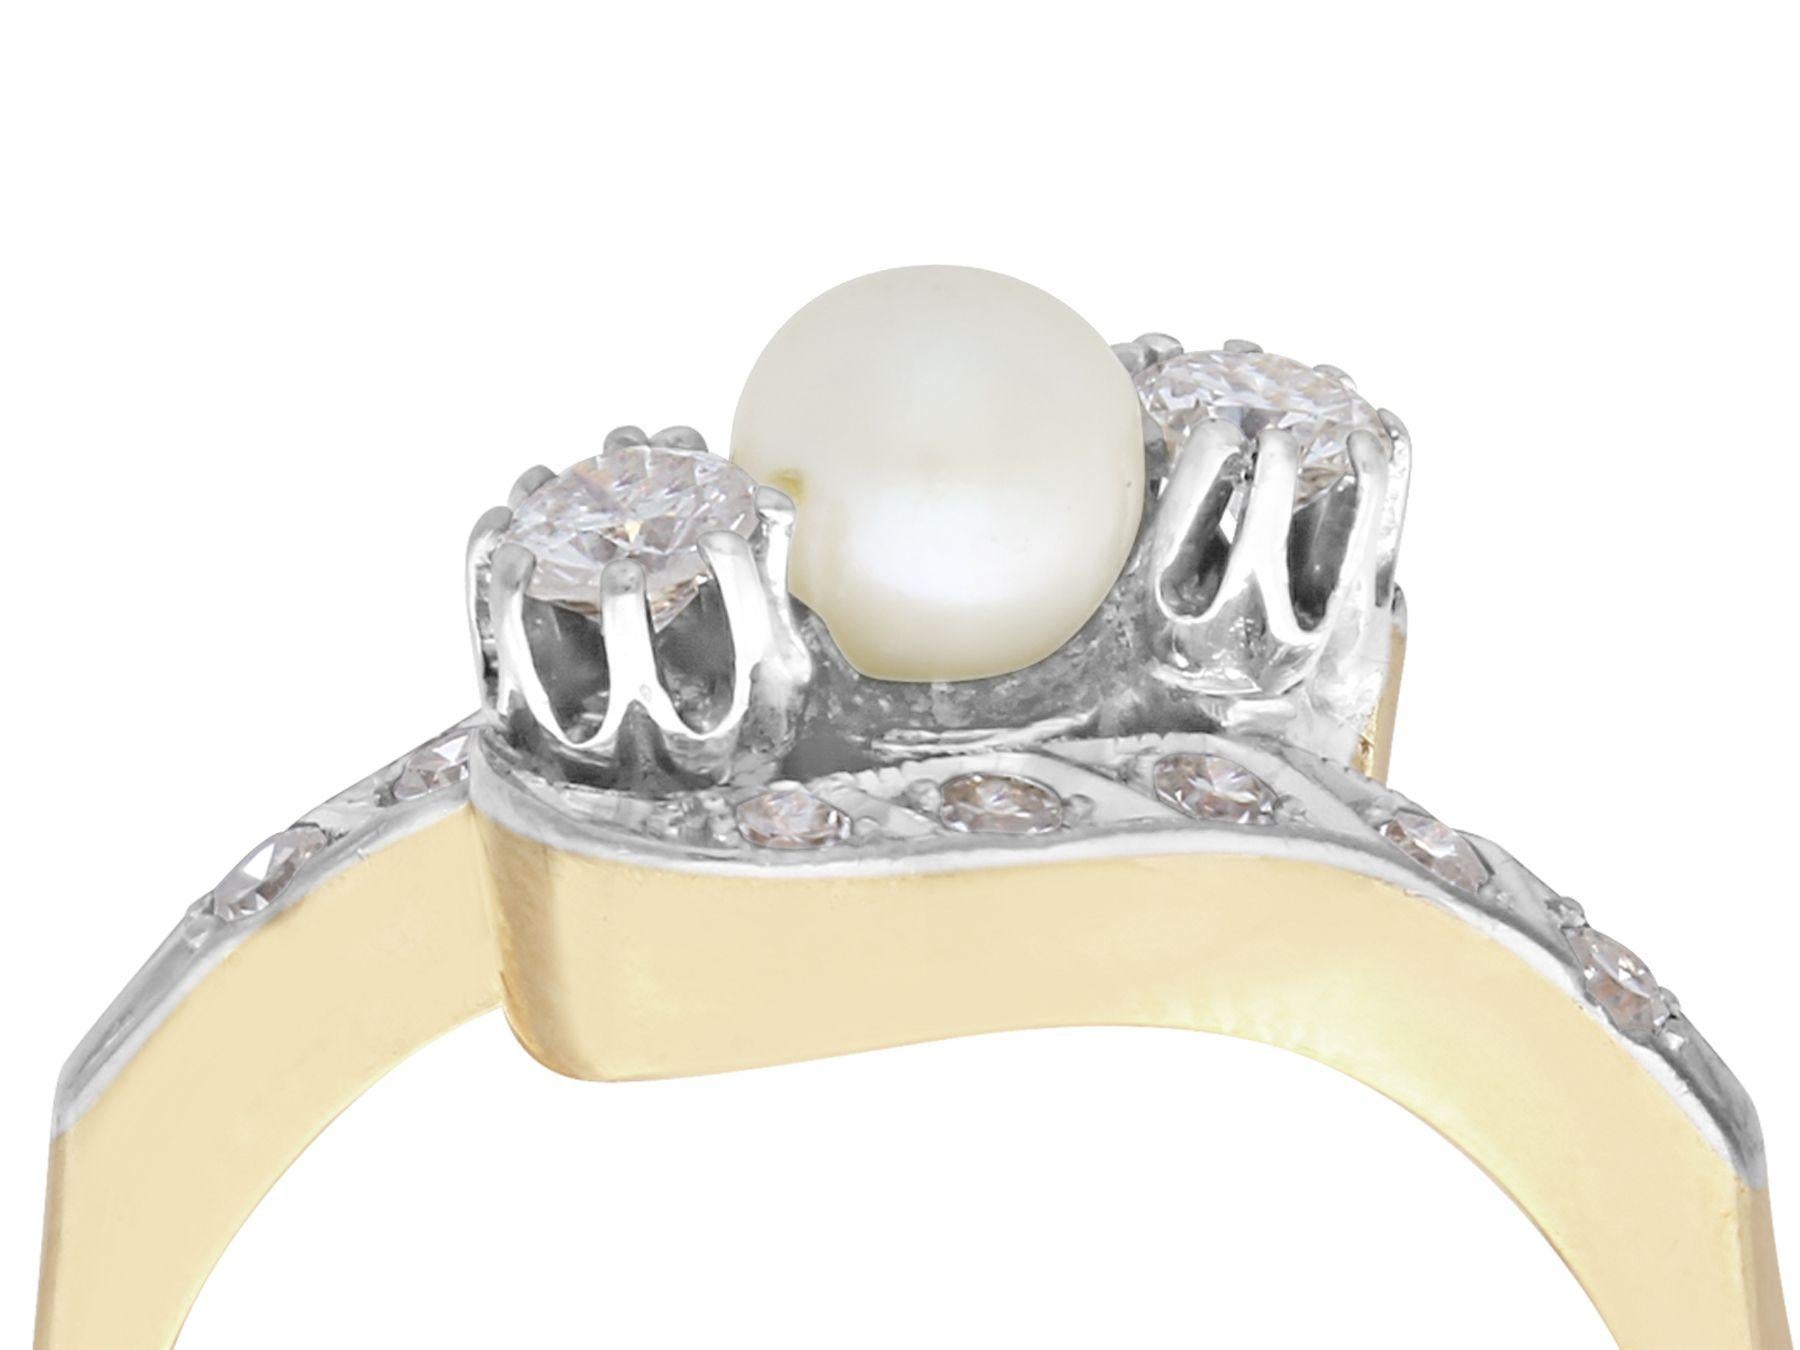 A fine and impressive vintage 0.56 carat diamond and natural pearl, 14 karat yellow gold and 14 karat white gold set cocktail ring; part of our vintage jewelry and estate jewelry collections.

This fine and impressive pearl and diamond twist ring